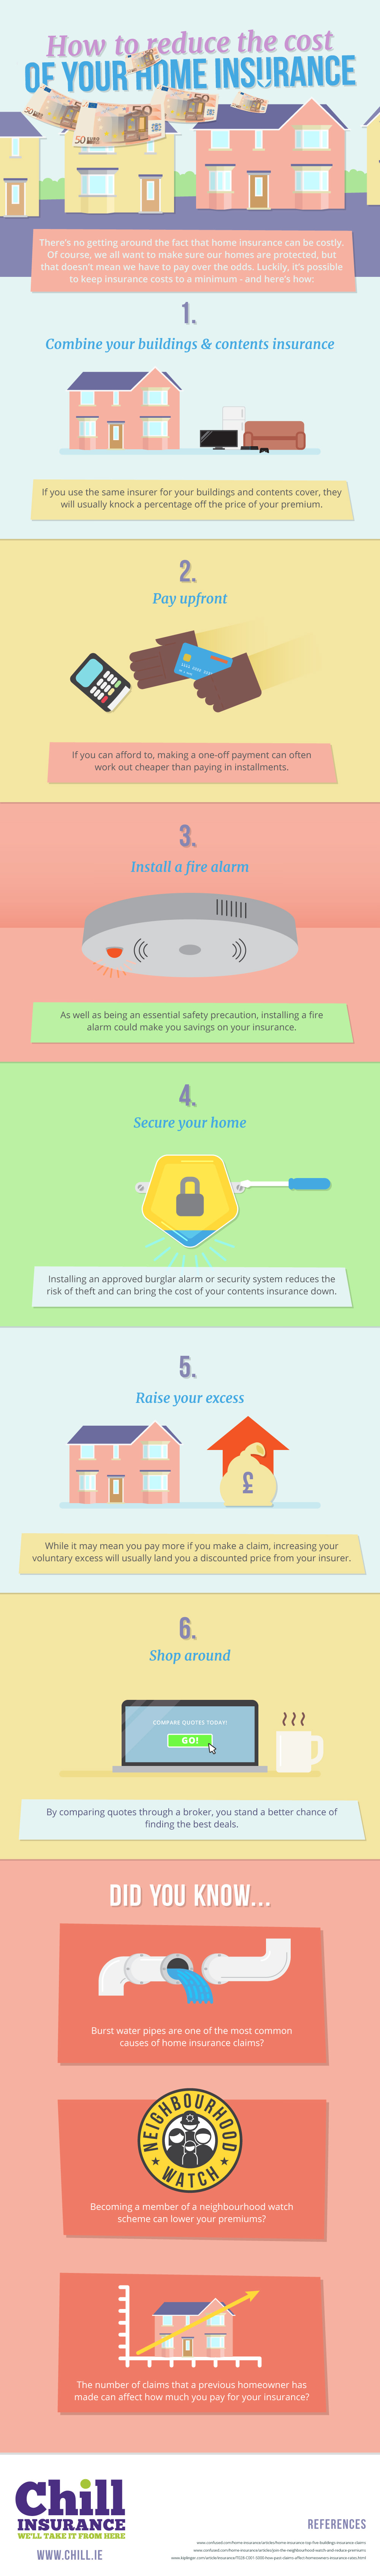 How-to-reduce-the-cost-of-your-home-insurance